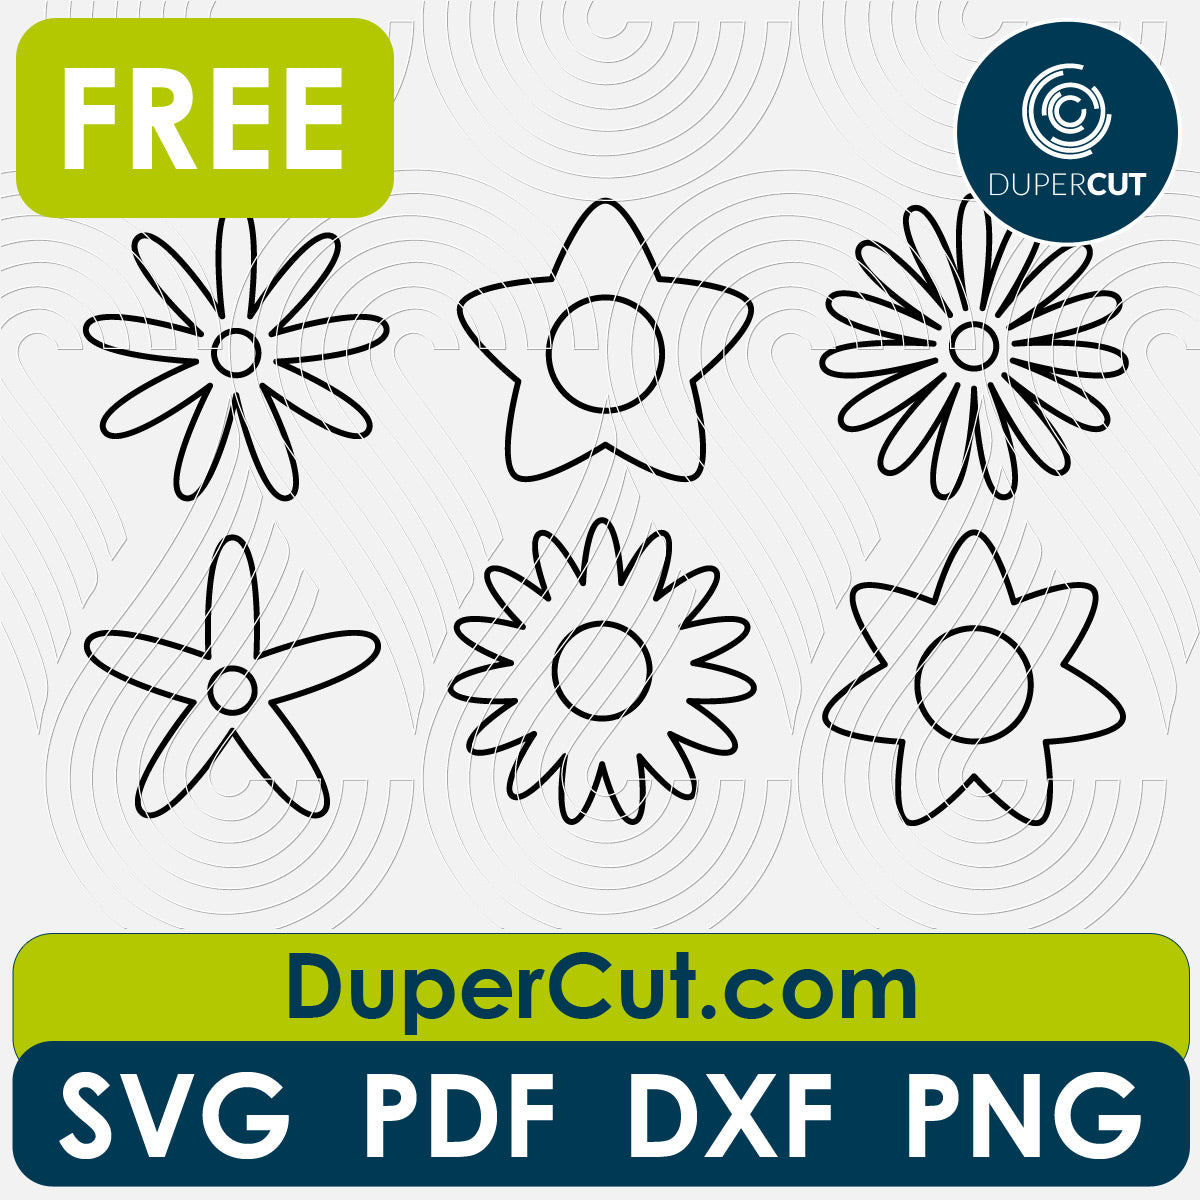 Simple flower shapes free cutting template SVG PNG DXF files for Glowforge, Cricut, Silhouette, CNC laser router by DuperCut.com